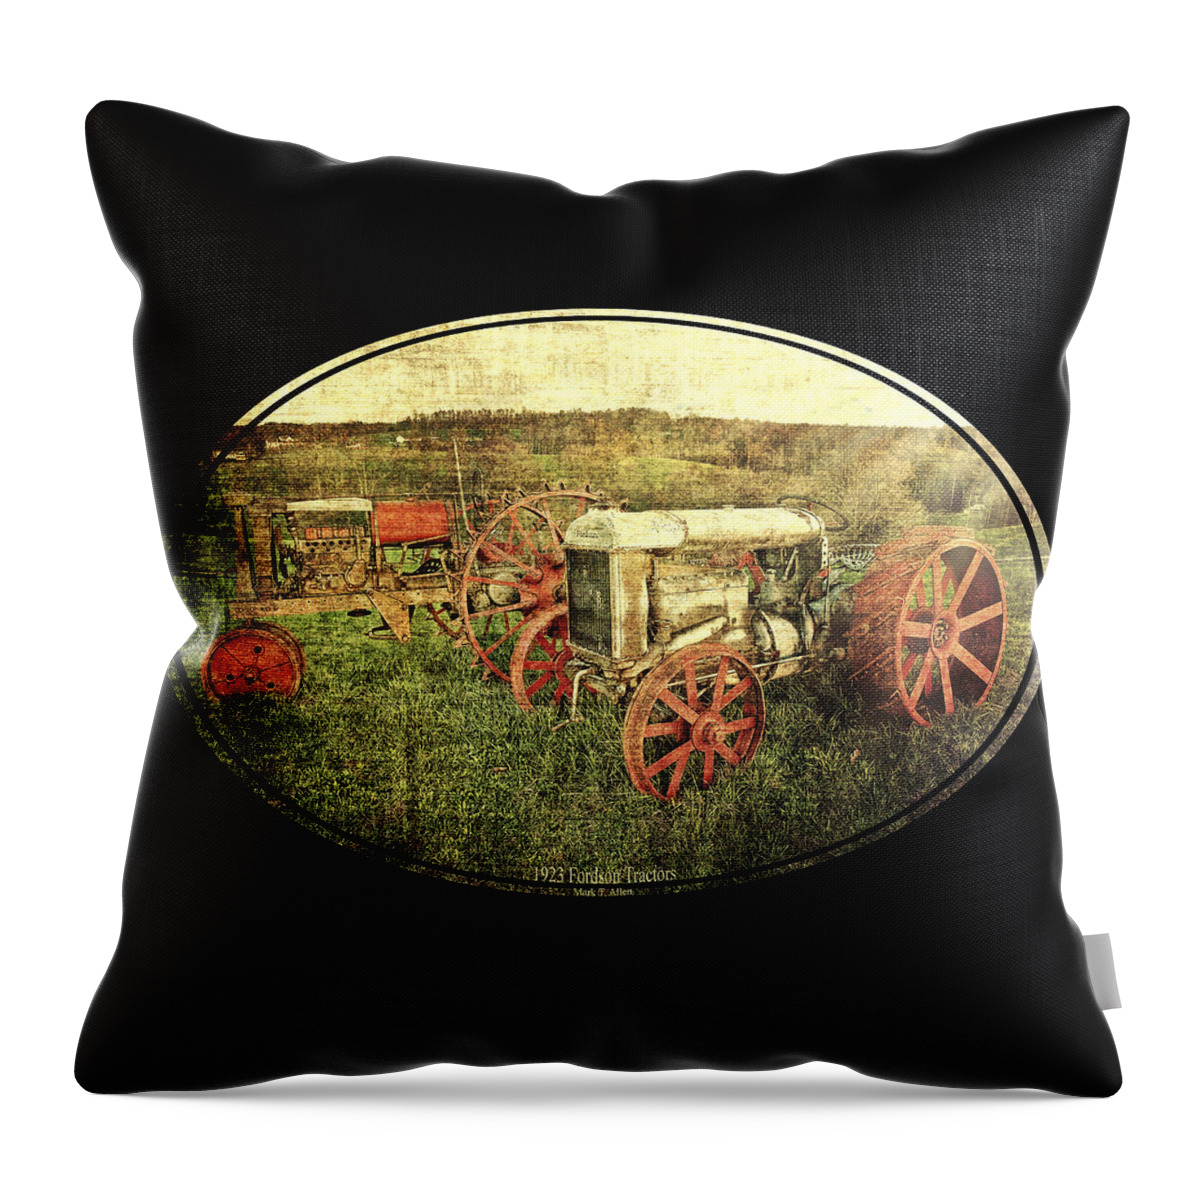 1923 Fordson Tractor Throw Pillow featuring the photograph Vintage 1923 Fordson Tractors by Mark Allen